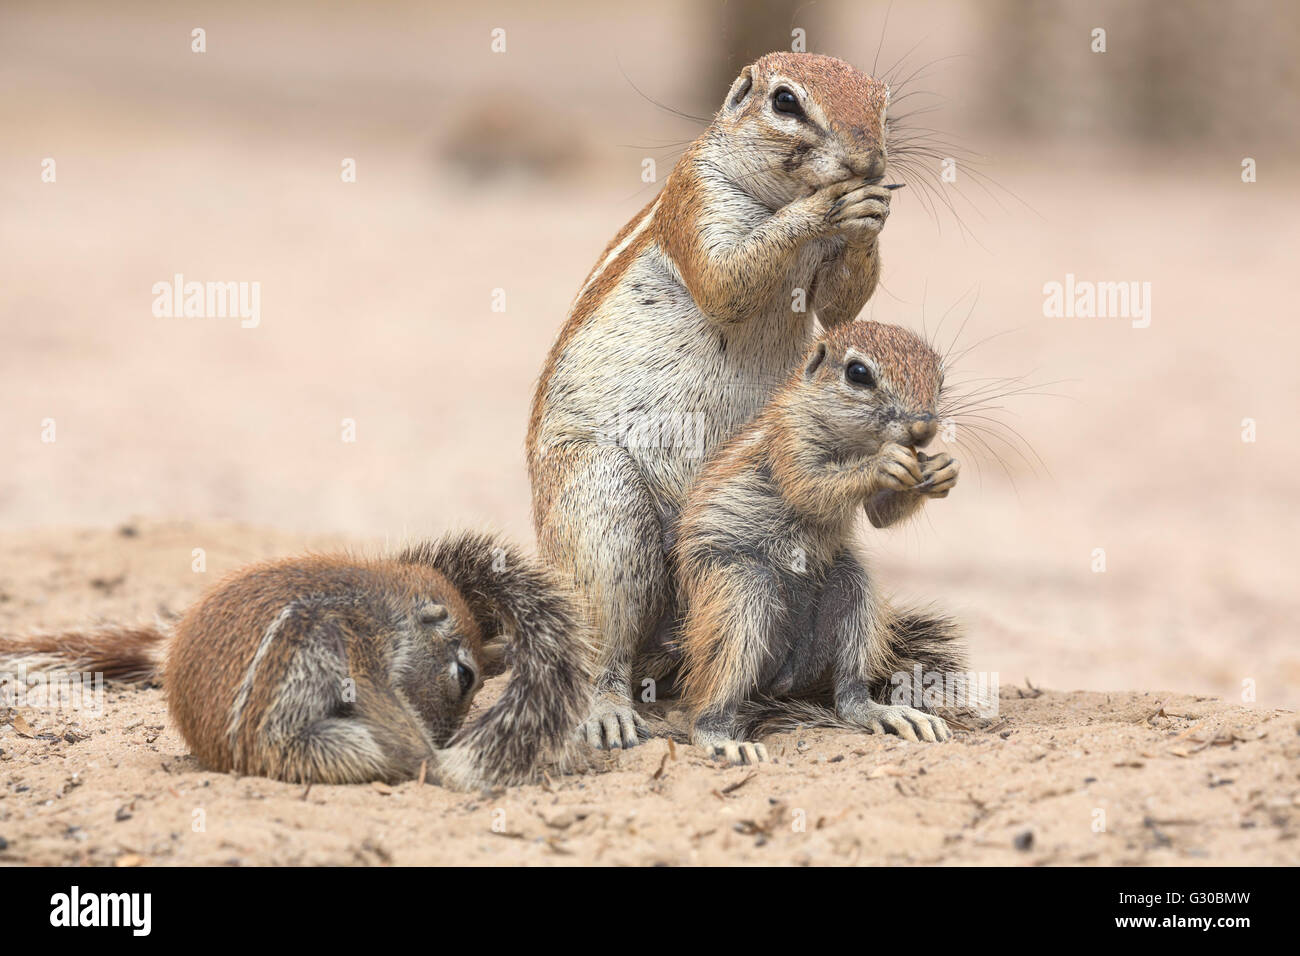 Ground squirrels (Xerus inauris), Kgalagadi Transfrontier Park, Northern Cape, South Africa, Africa Stock Photo